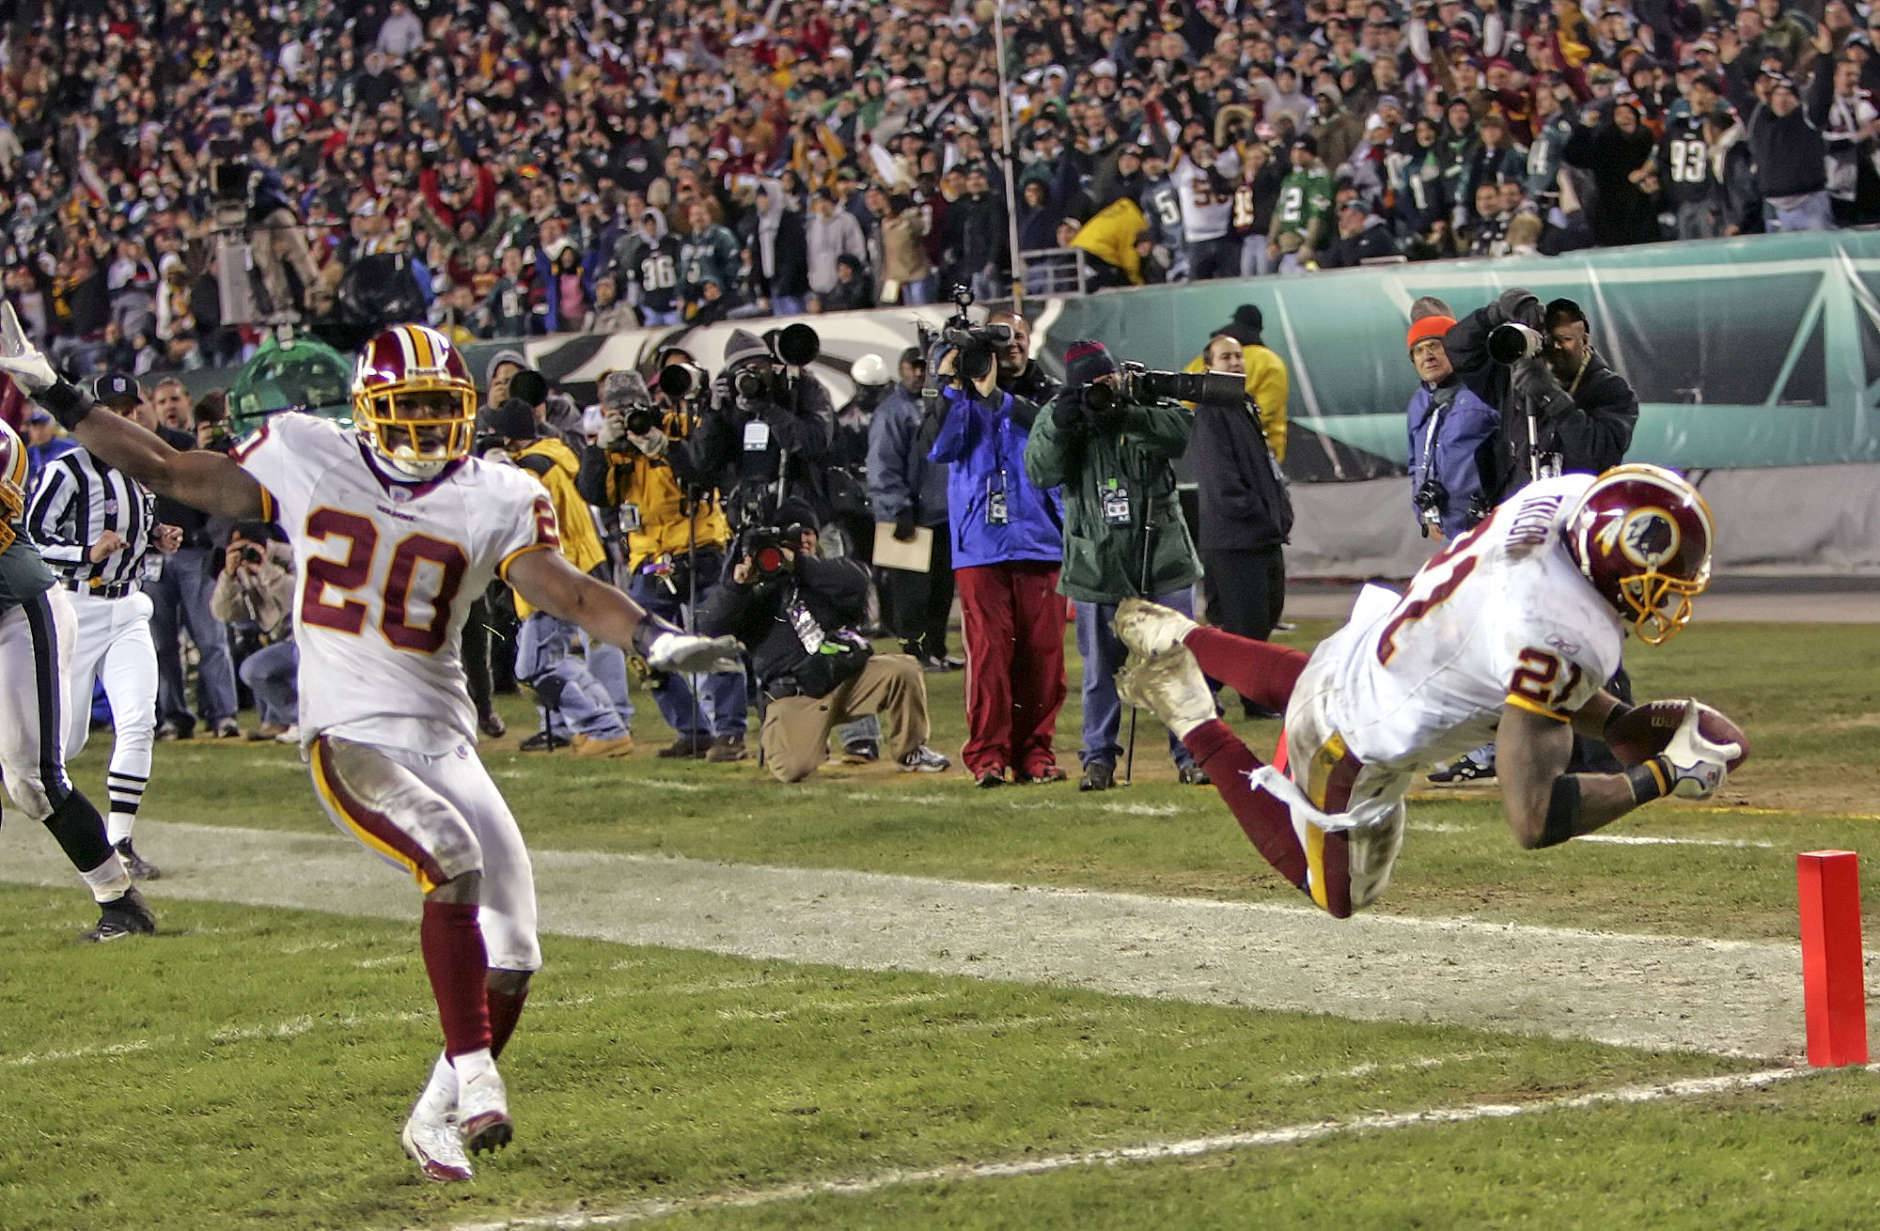 Washington Redskins safety Sean Taylor (21) leaps for a touchdown after his 39-yard fumble-return against the Philadelphia Eagles in the fourth quarter of their NFL football game Sunday, Jan. 1, 2006, in Philadelphia. At left is safety Pierson Prioleau (20). The Redskins won, 31-20. (AP Photo/Tom Mihalek)